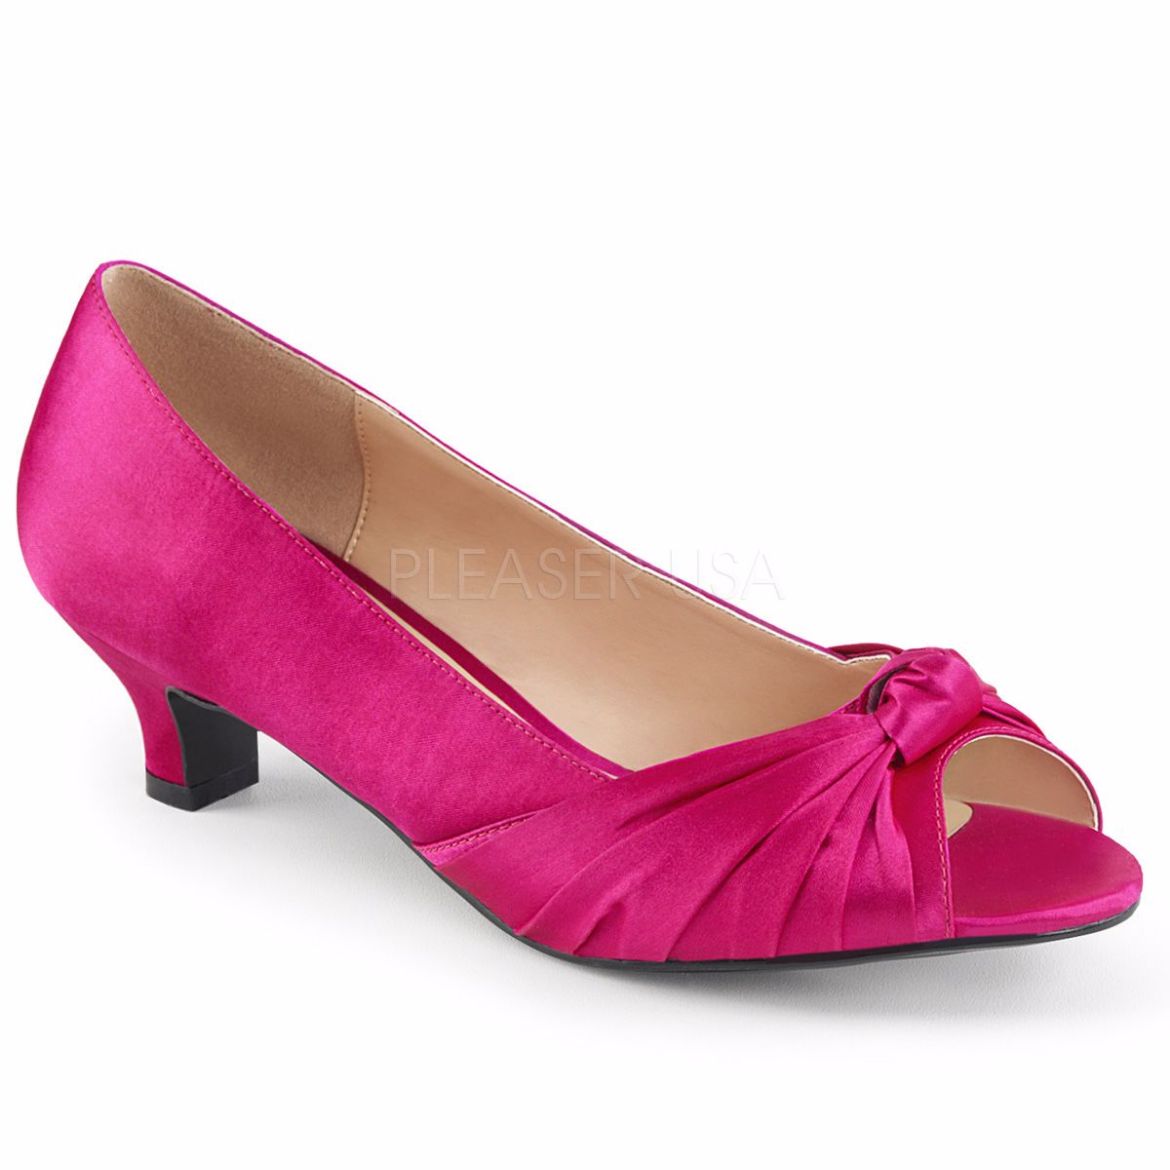 Product image of Pleaser Pink Label Fab-422 Hot Pink Satin, 2 inch (5.1 cm) Heel Court Pump Shoes